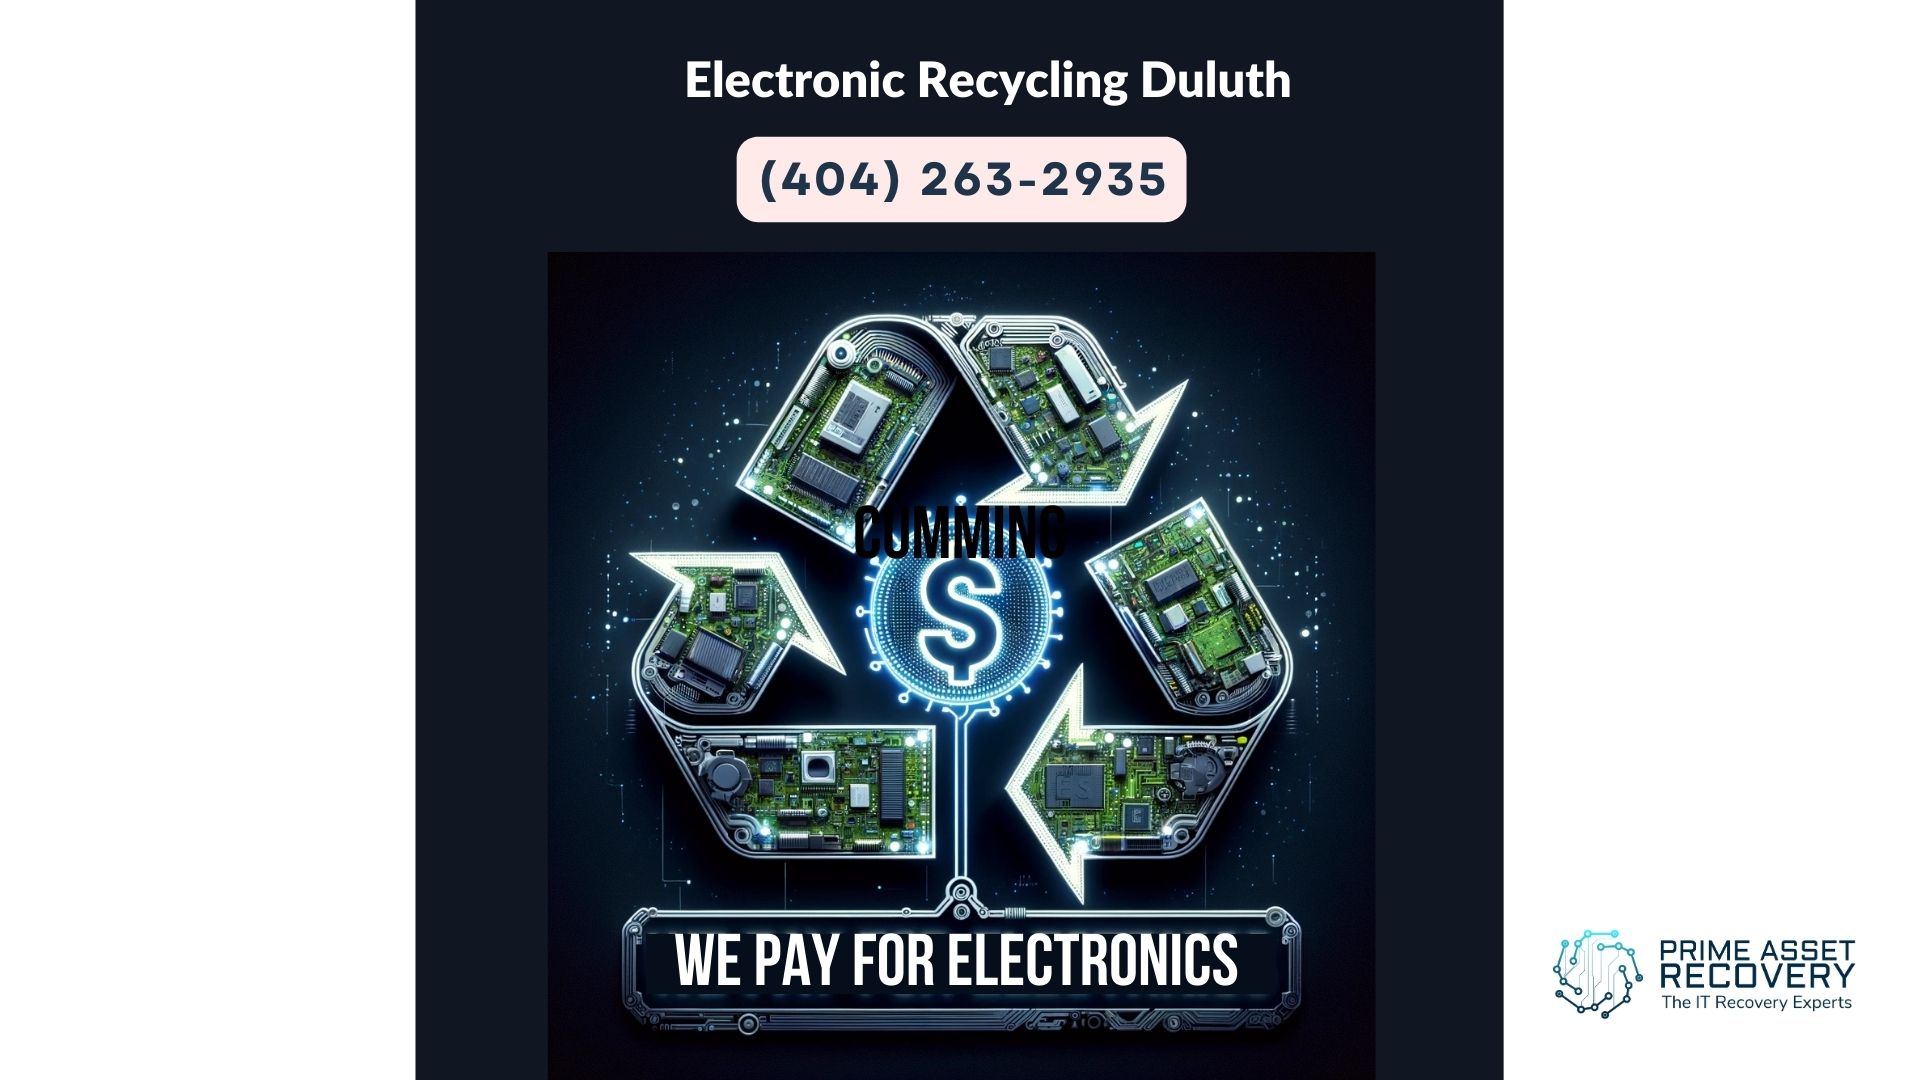 Electronic Recycling Duluth - Prime Asset Recovery Your Partner in Responsible Electronics Recycling